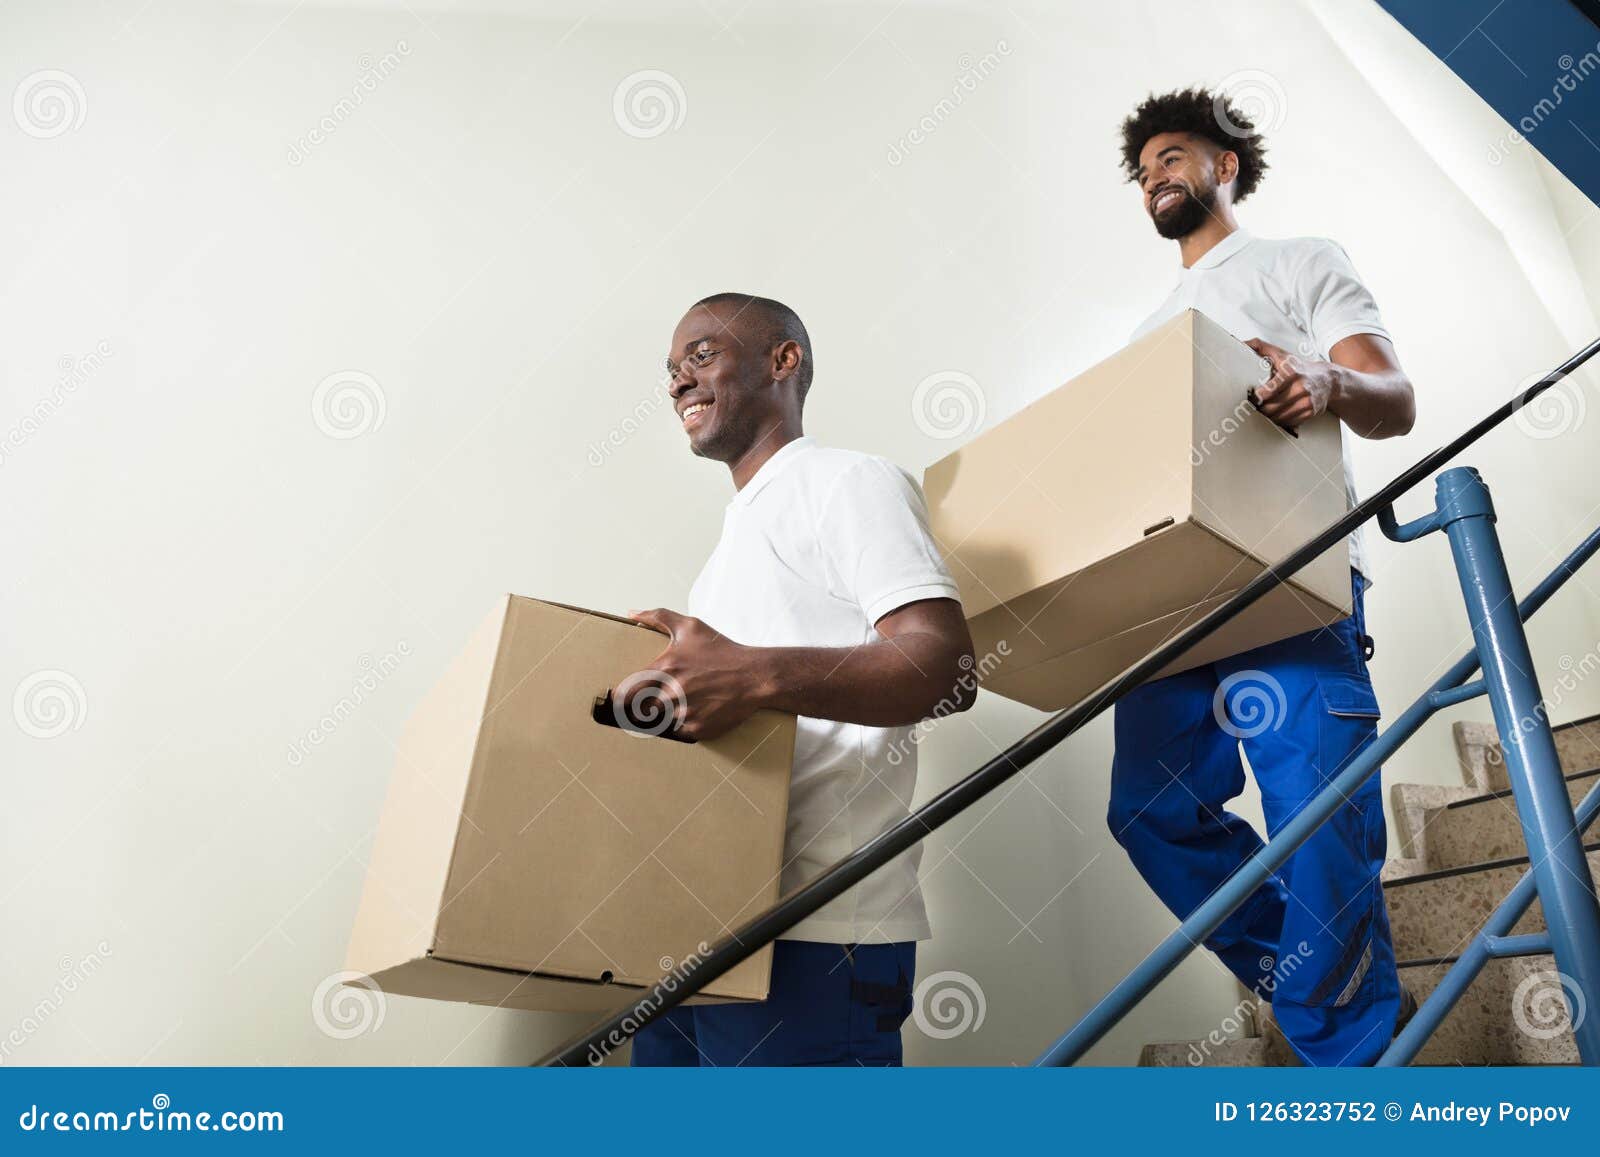 portrait of two movers holding cardboard boxes